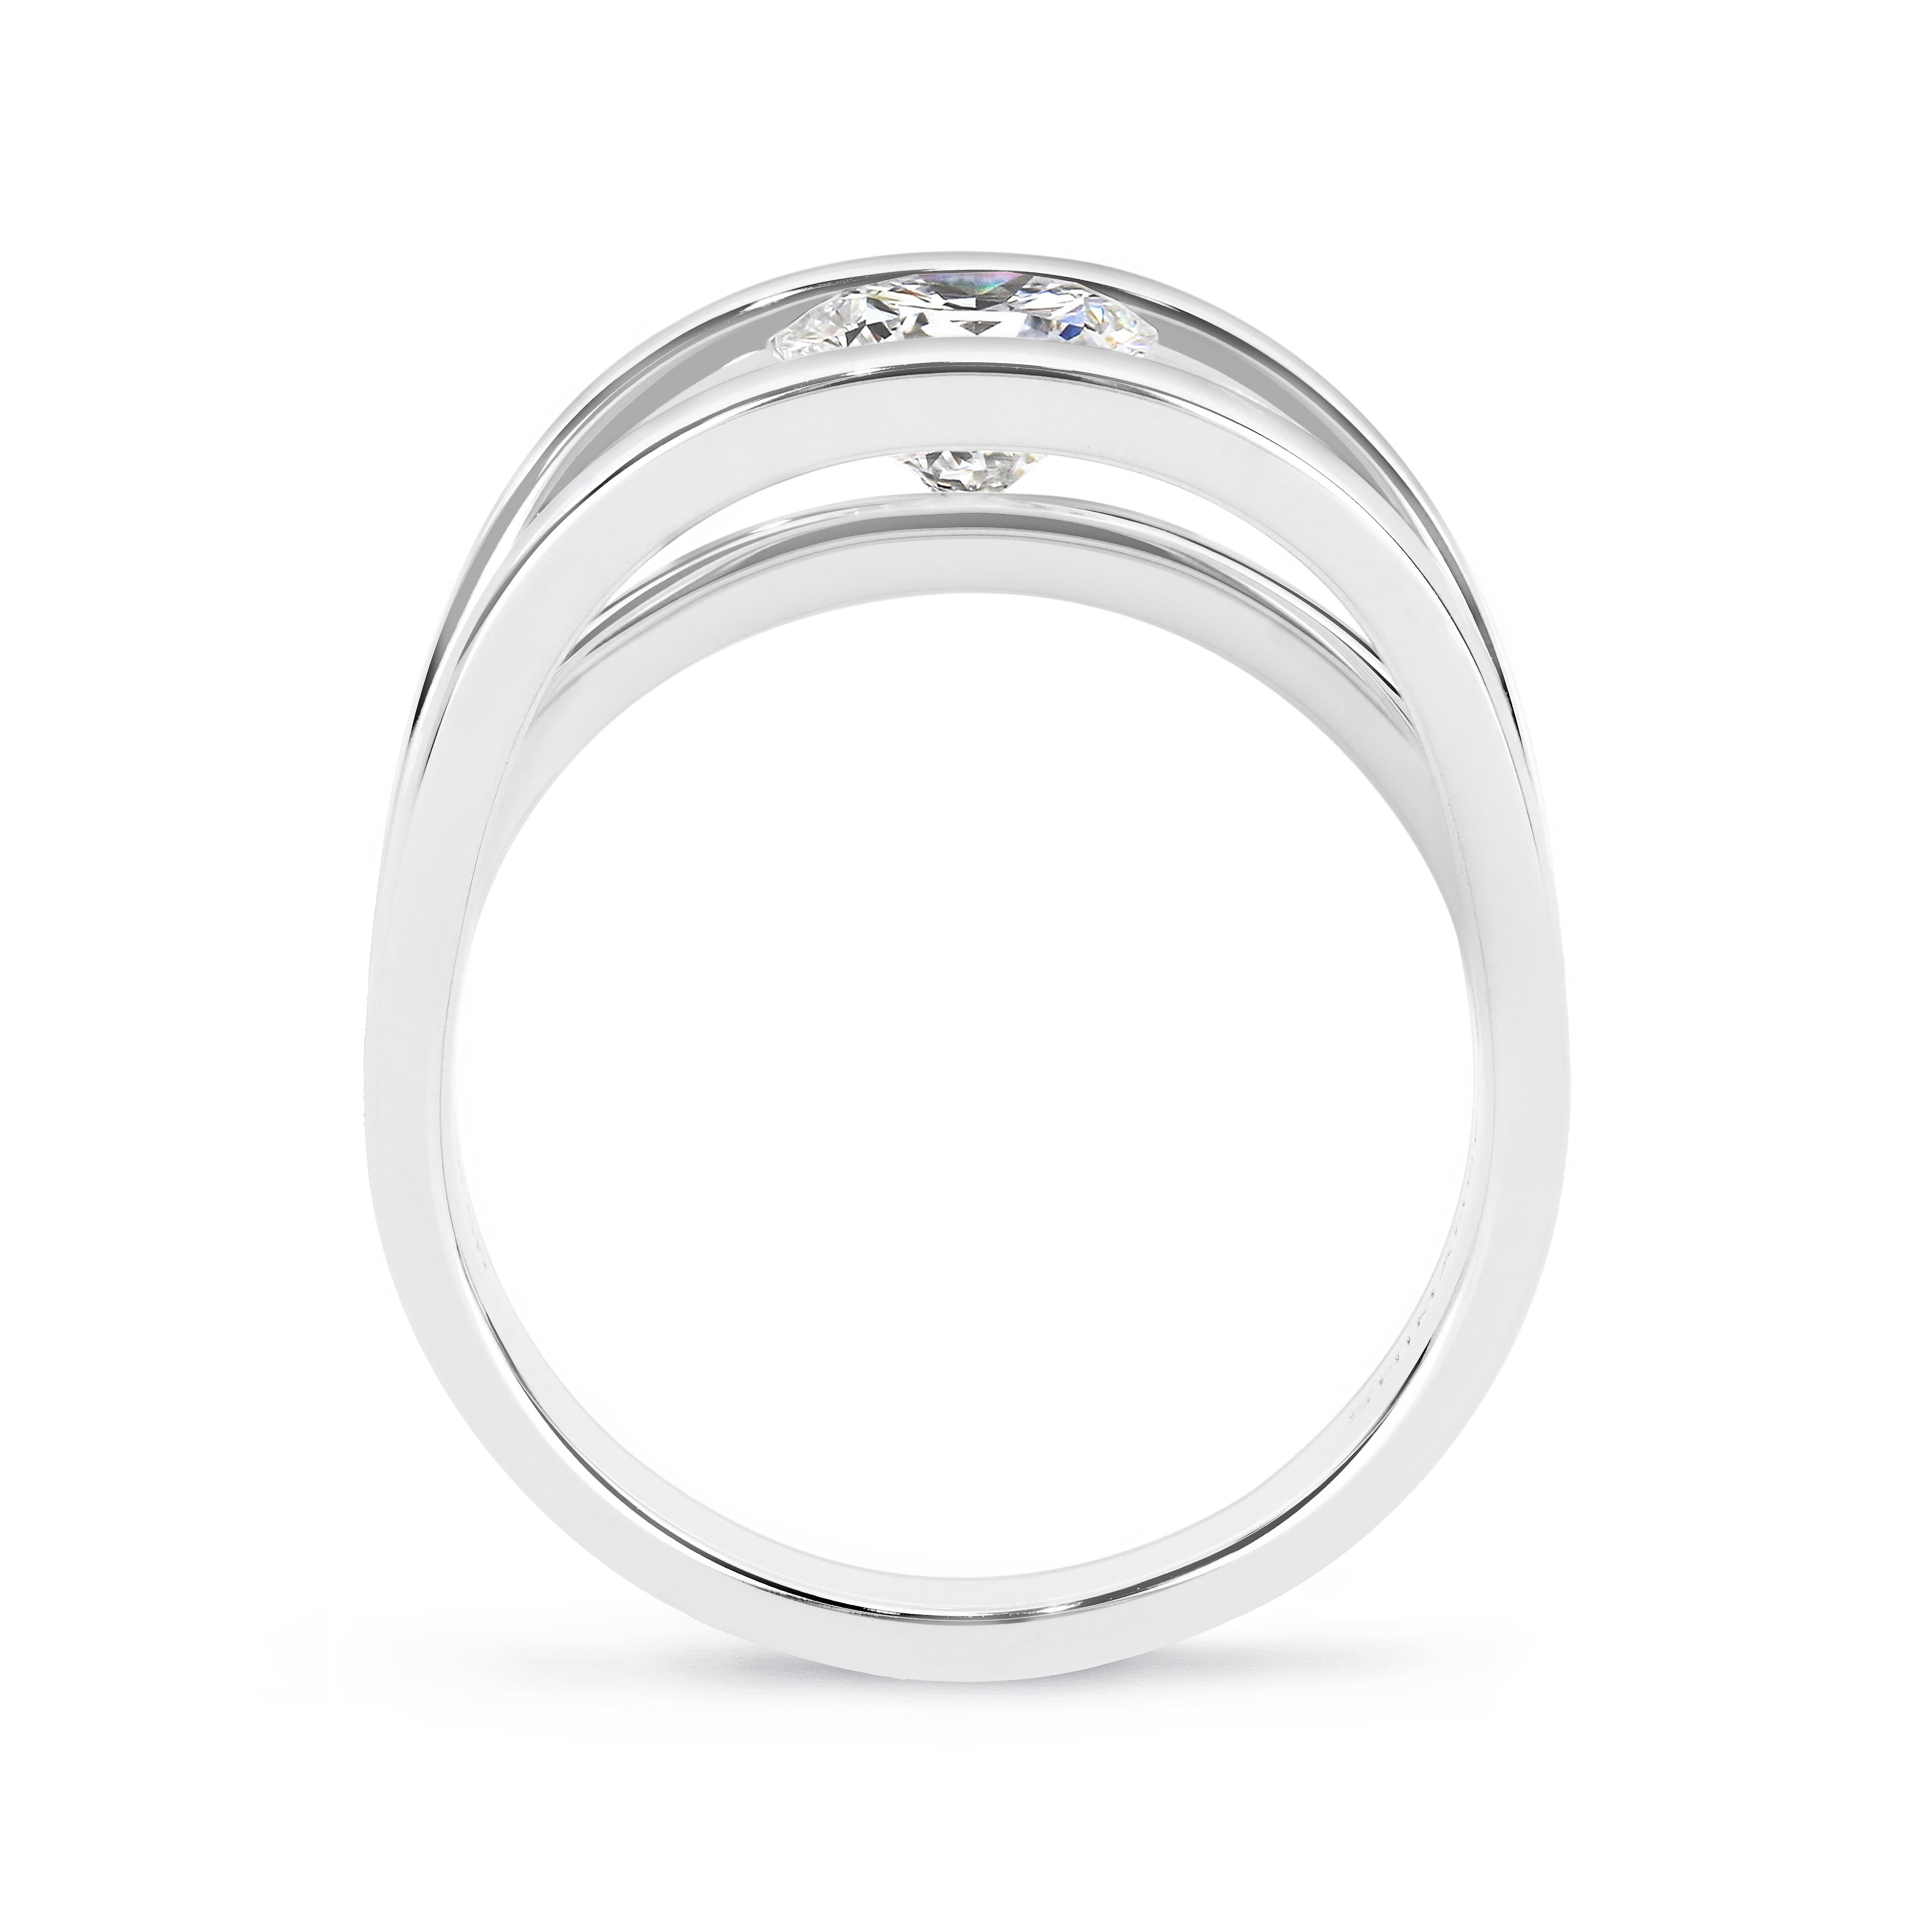 Evolym Diamond Engagement Ring 0.70 Carat in 18K White Gold Side View